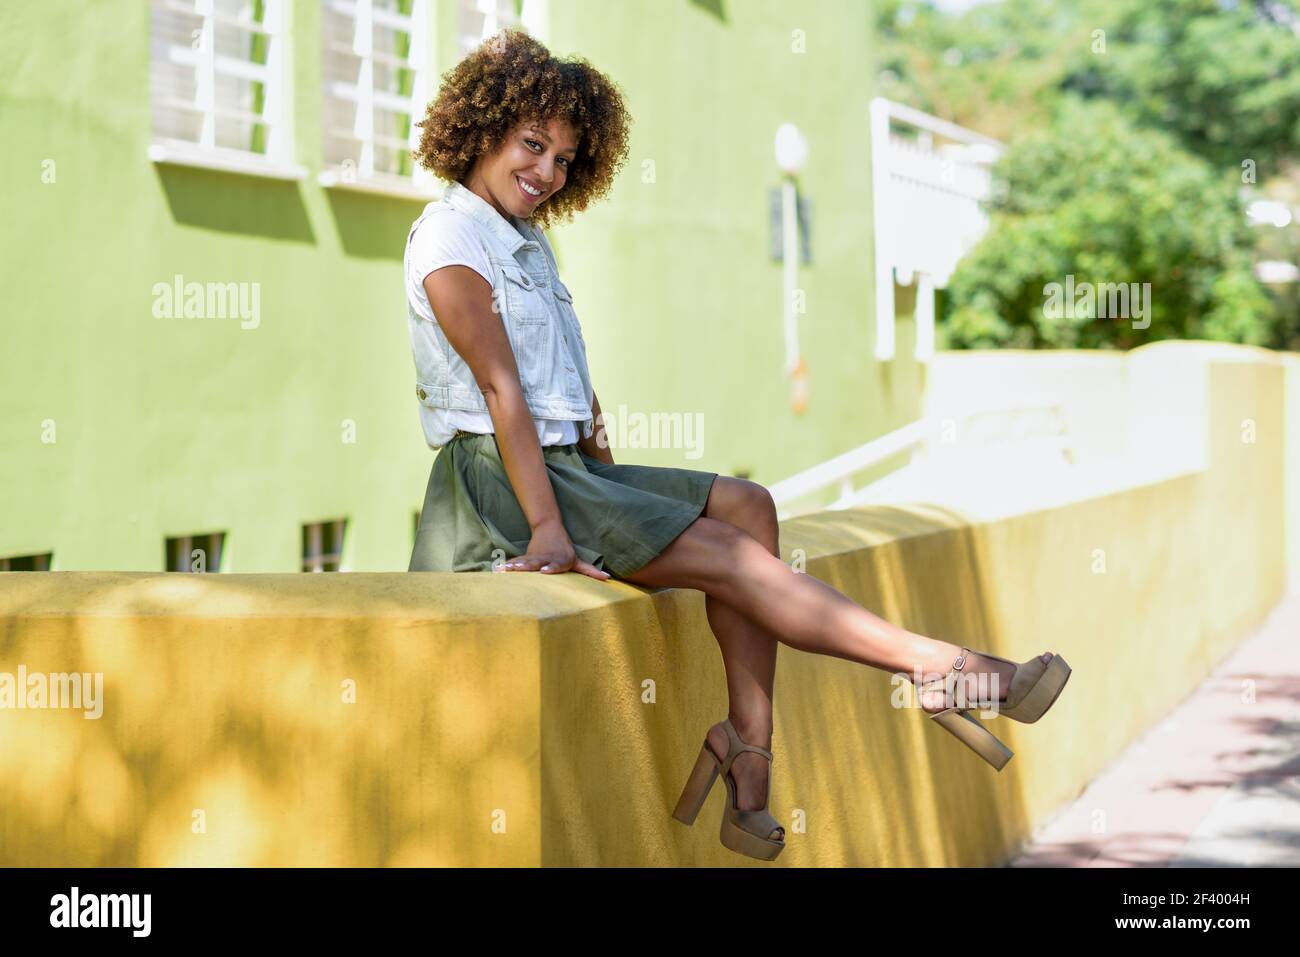 Young black woman, afro hairstyle, sitting on a wall smiling. Girl, model of fashion, wearing casual clothes in urban background. Female with skirt, denim vest and high heels. Stock Photo